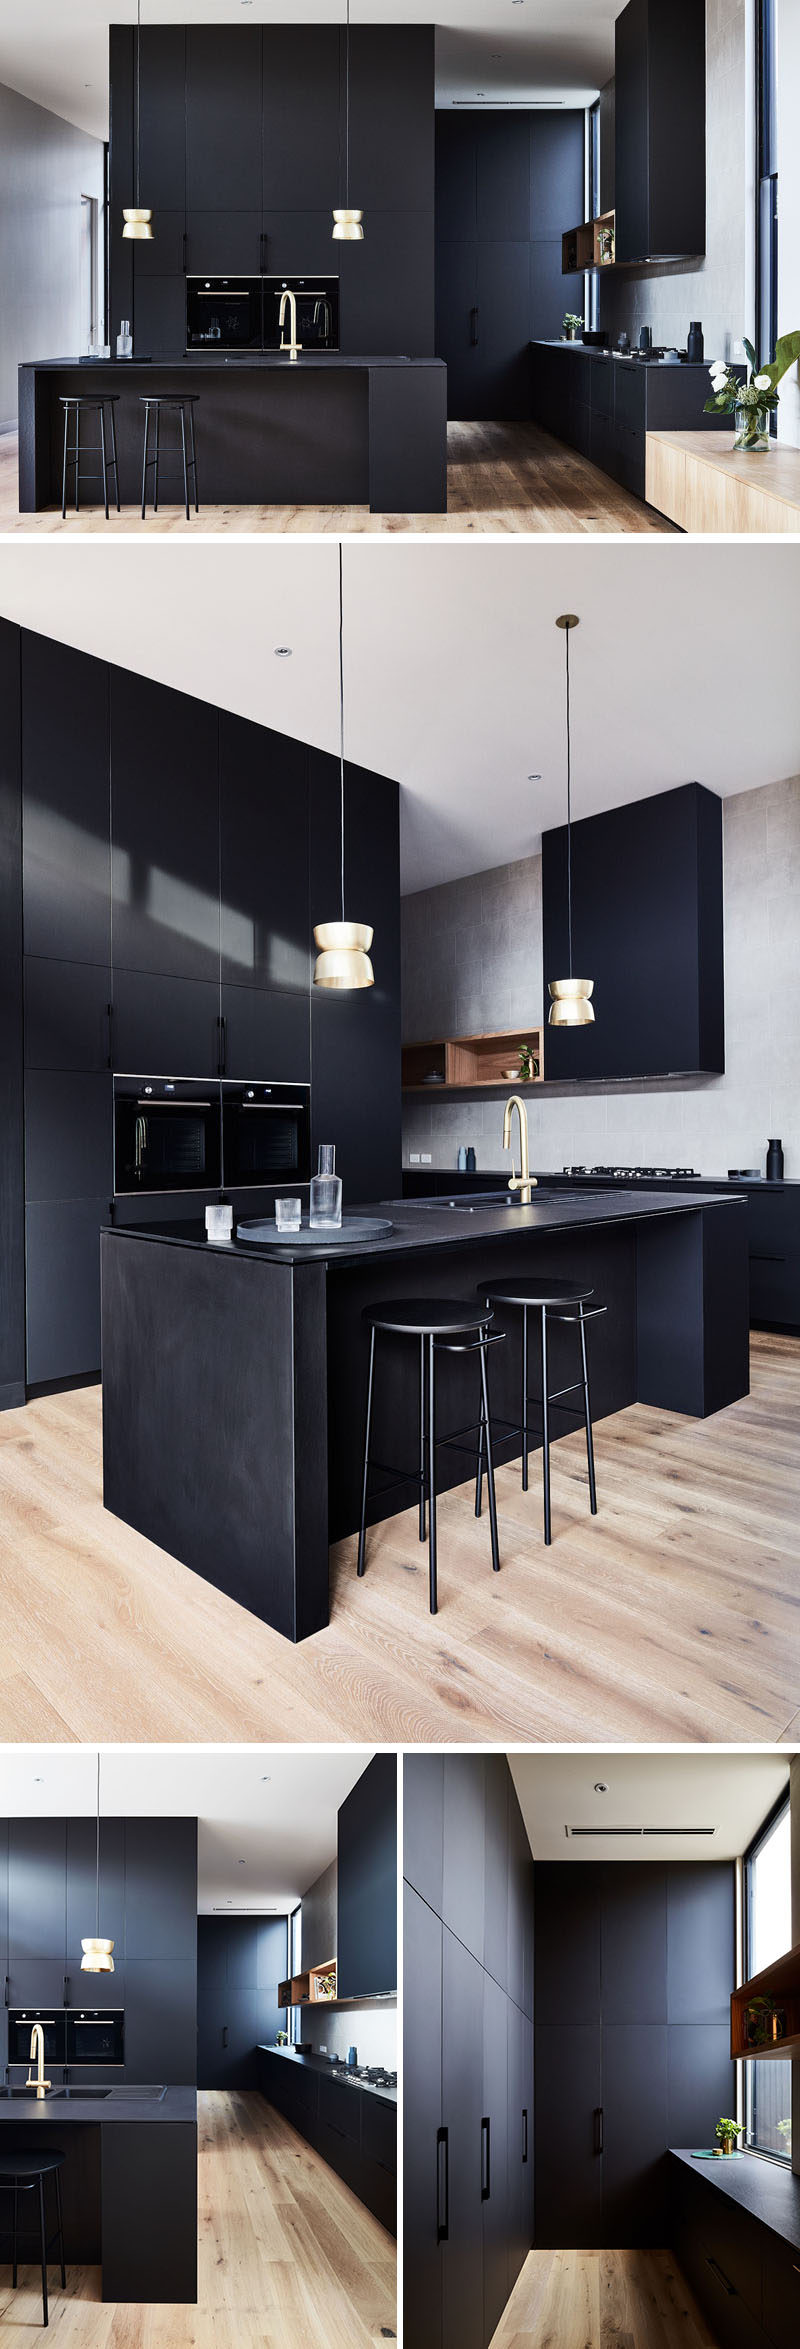 A matte black kitchen with minimal hardware makes a statement against the white walls, while brass fittings add a touch of glamour. #MatteBlack #BlackKitchen #ModernKitchen